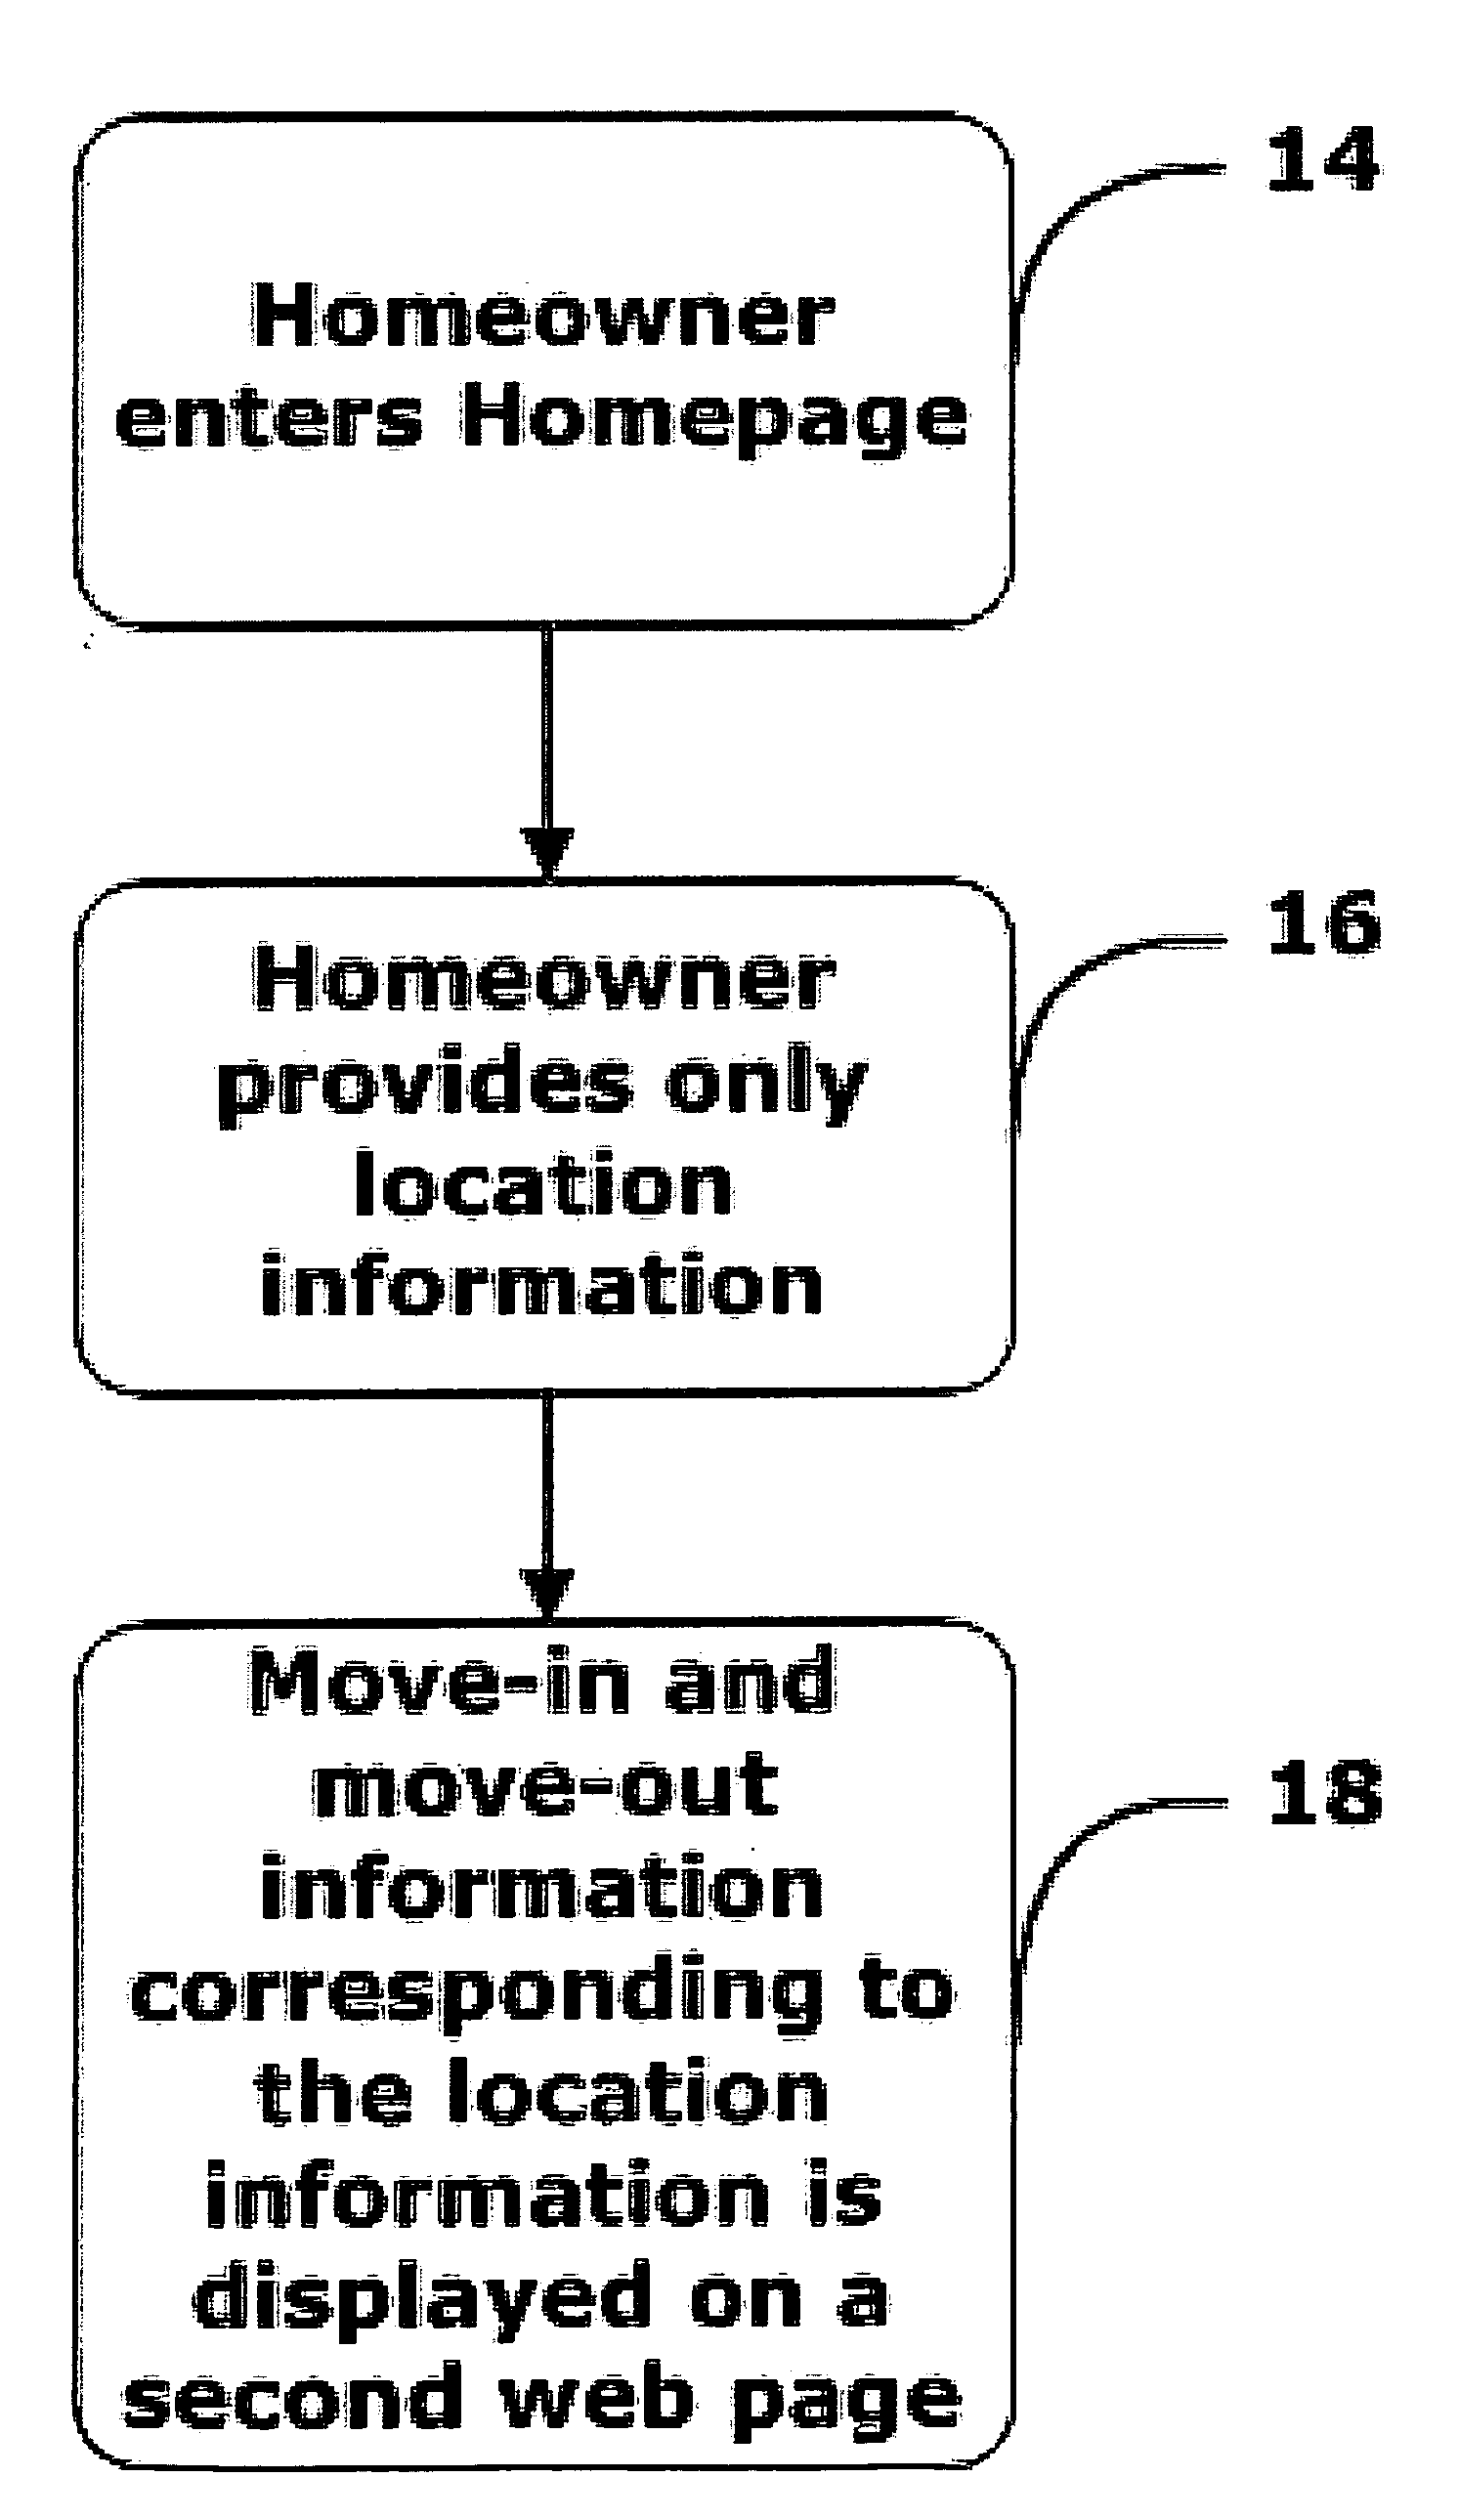 System for simply and directly providing local information based solely on zip code information